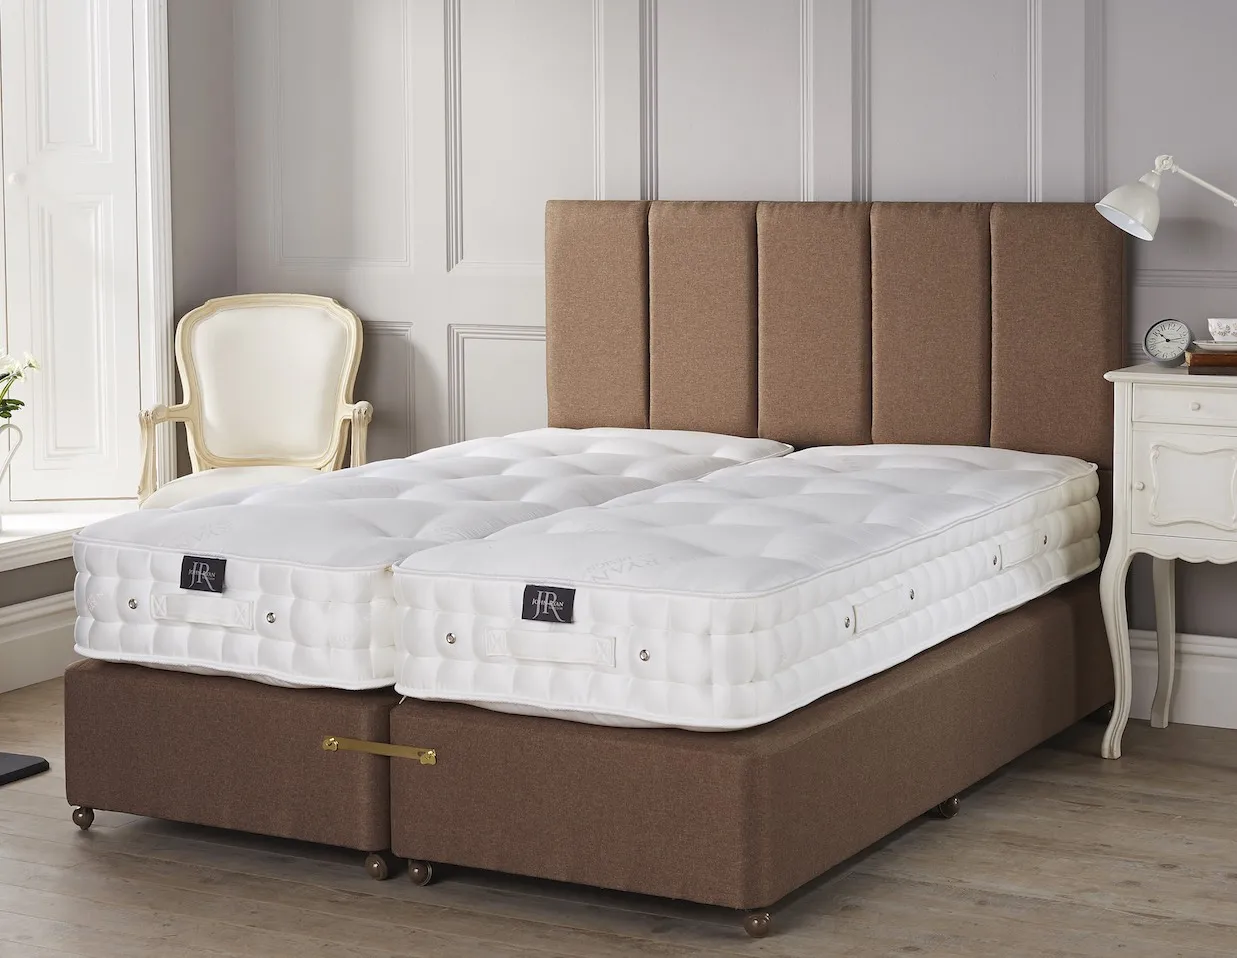 Zip And Links Beds Mattresses, All In One King Size Bed